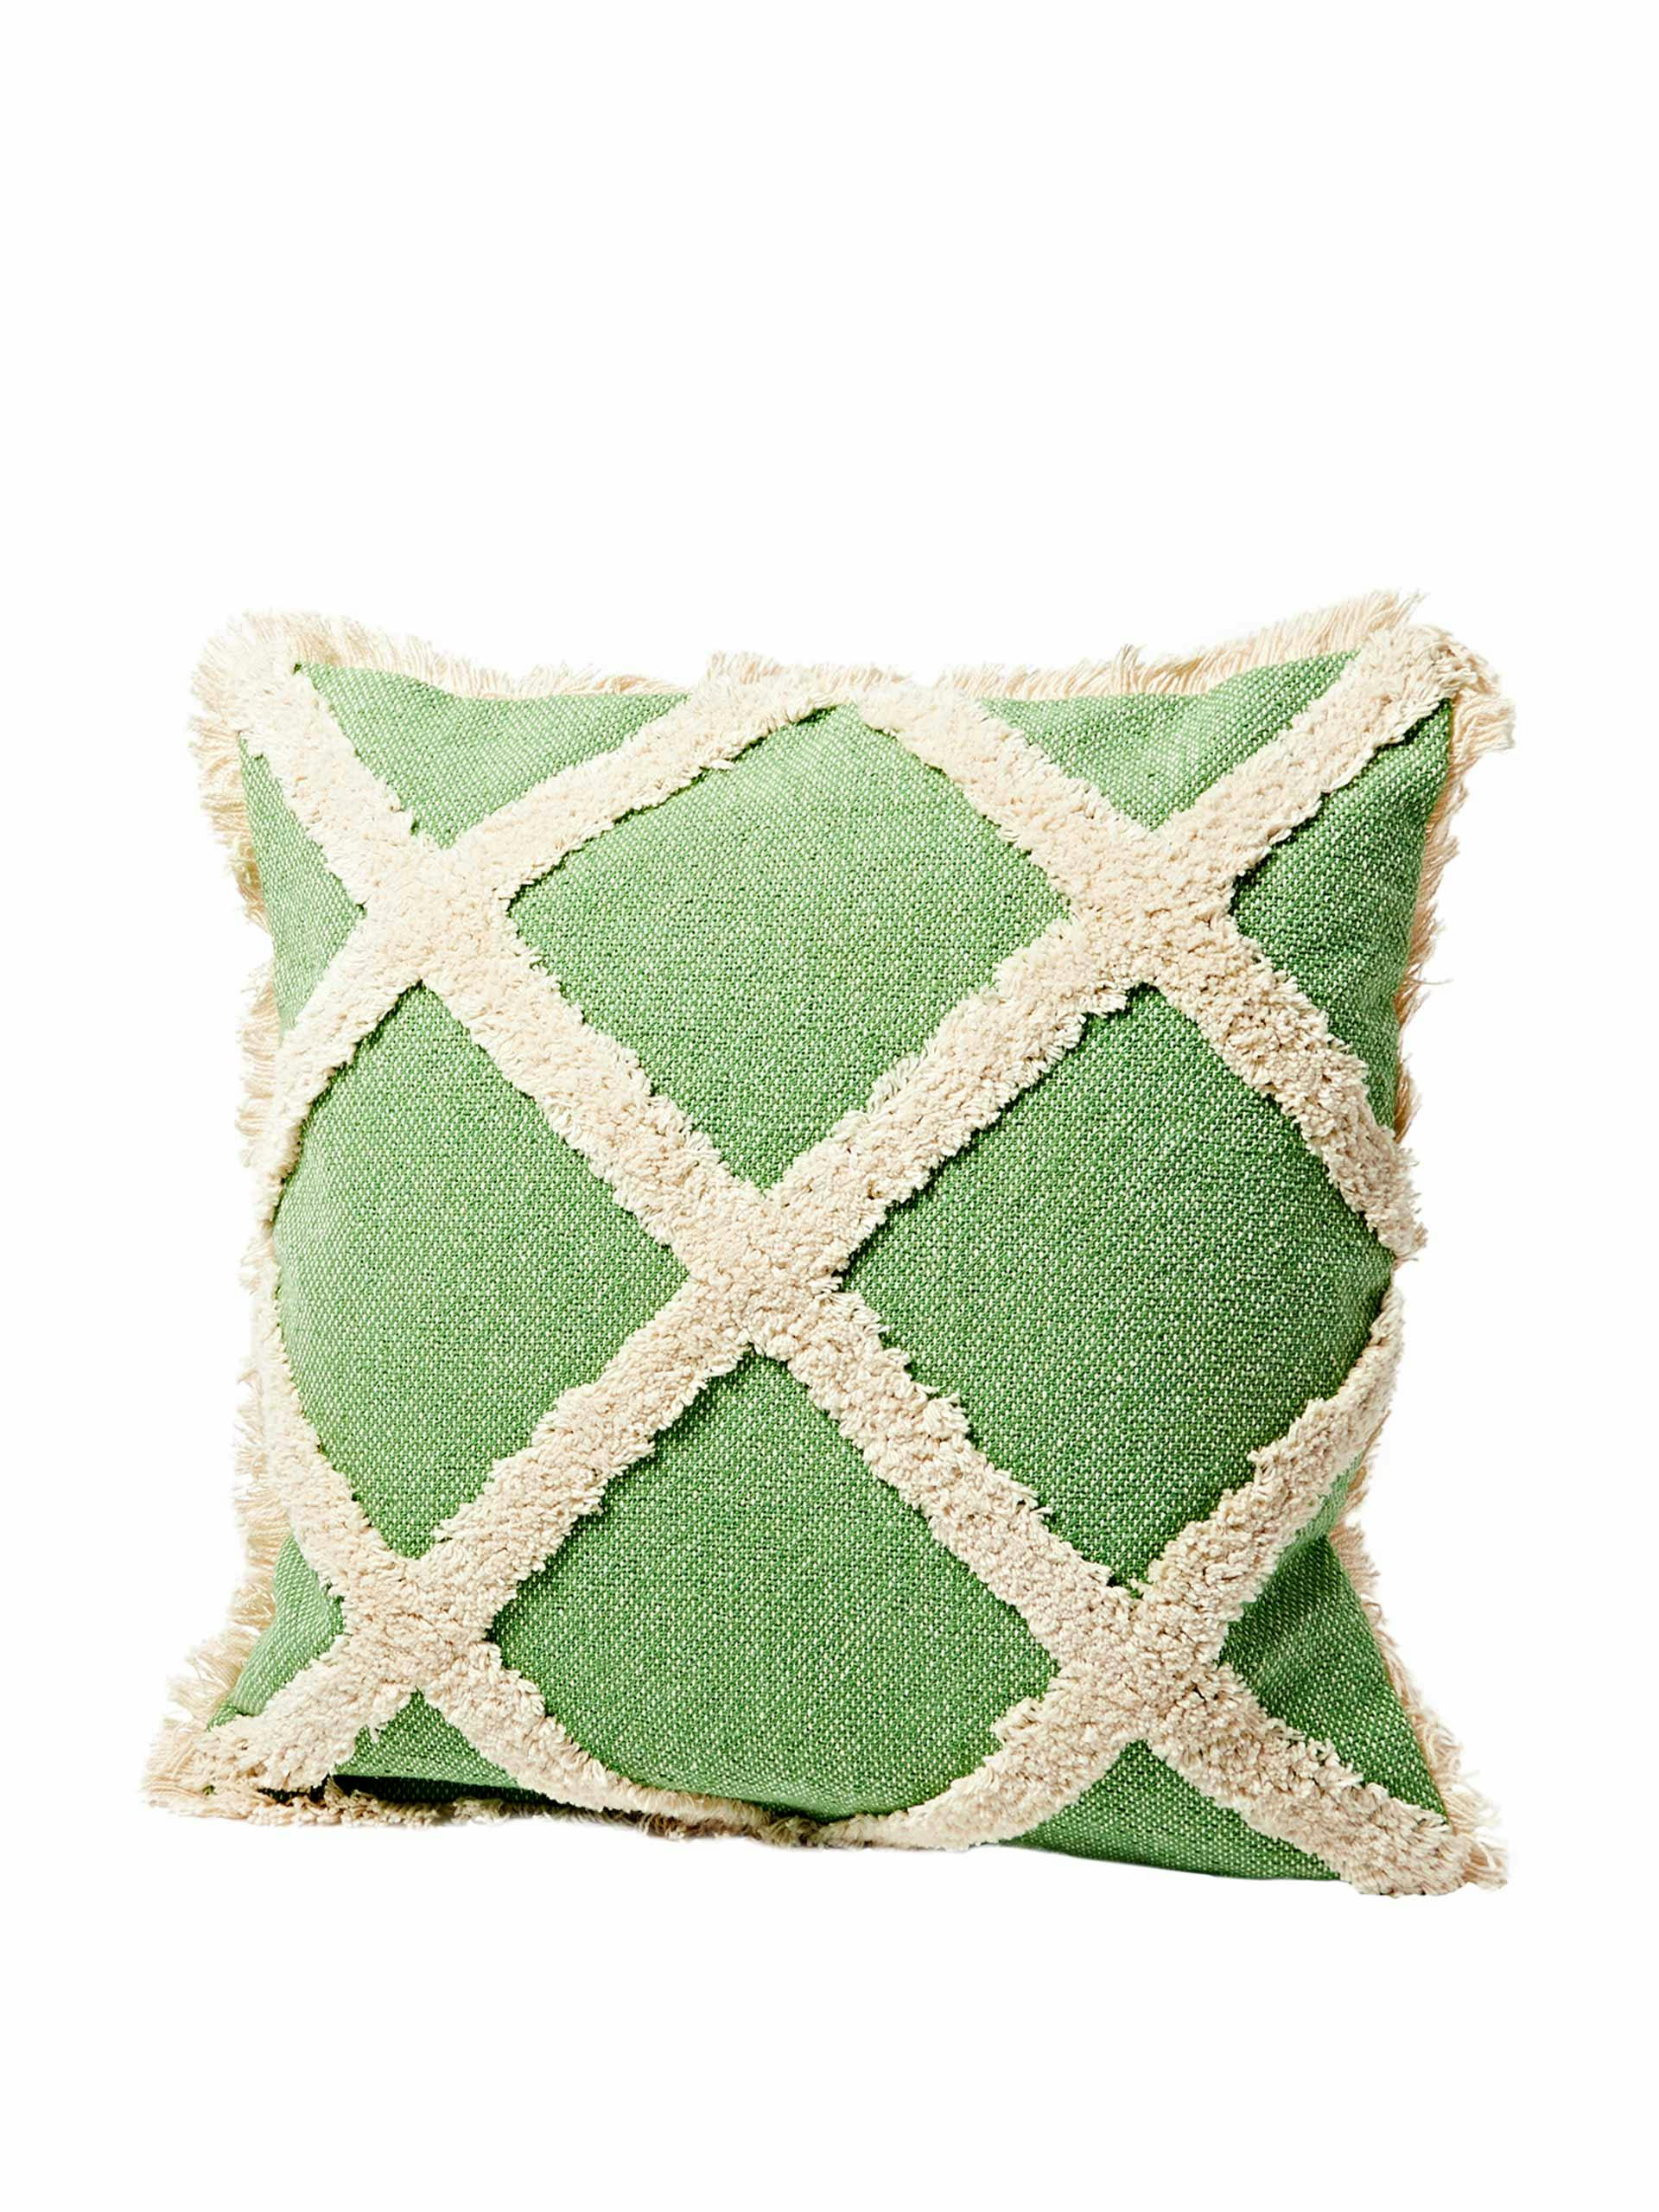 Tufted green cushion cover